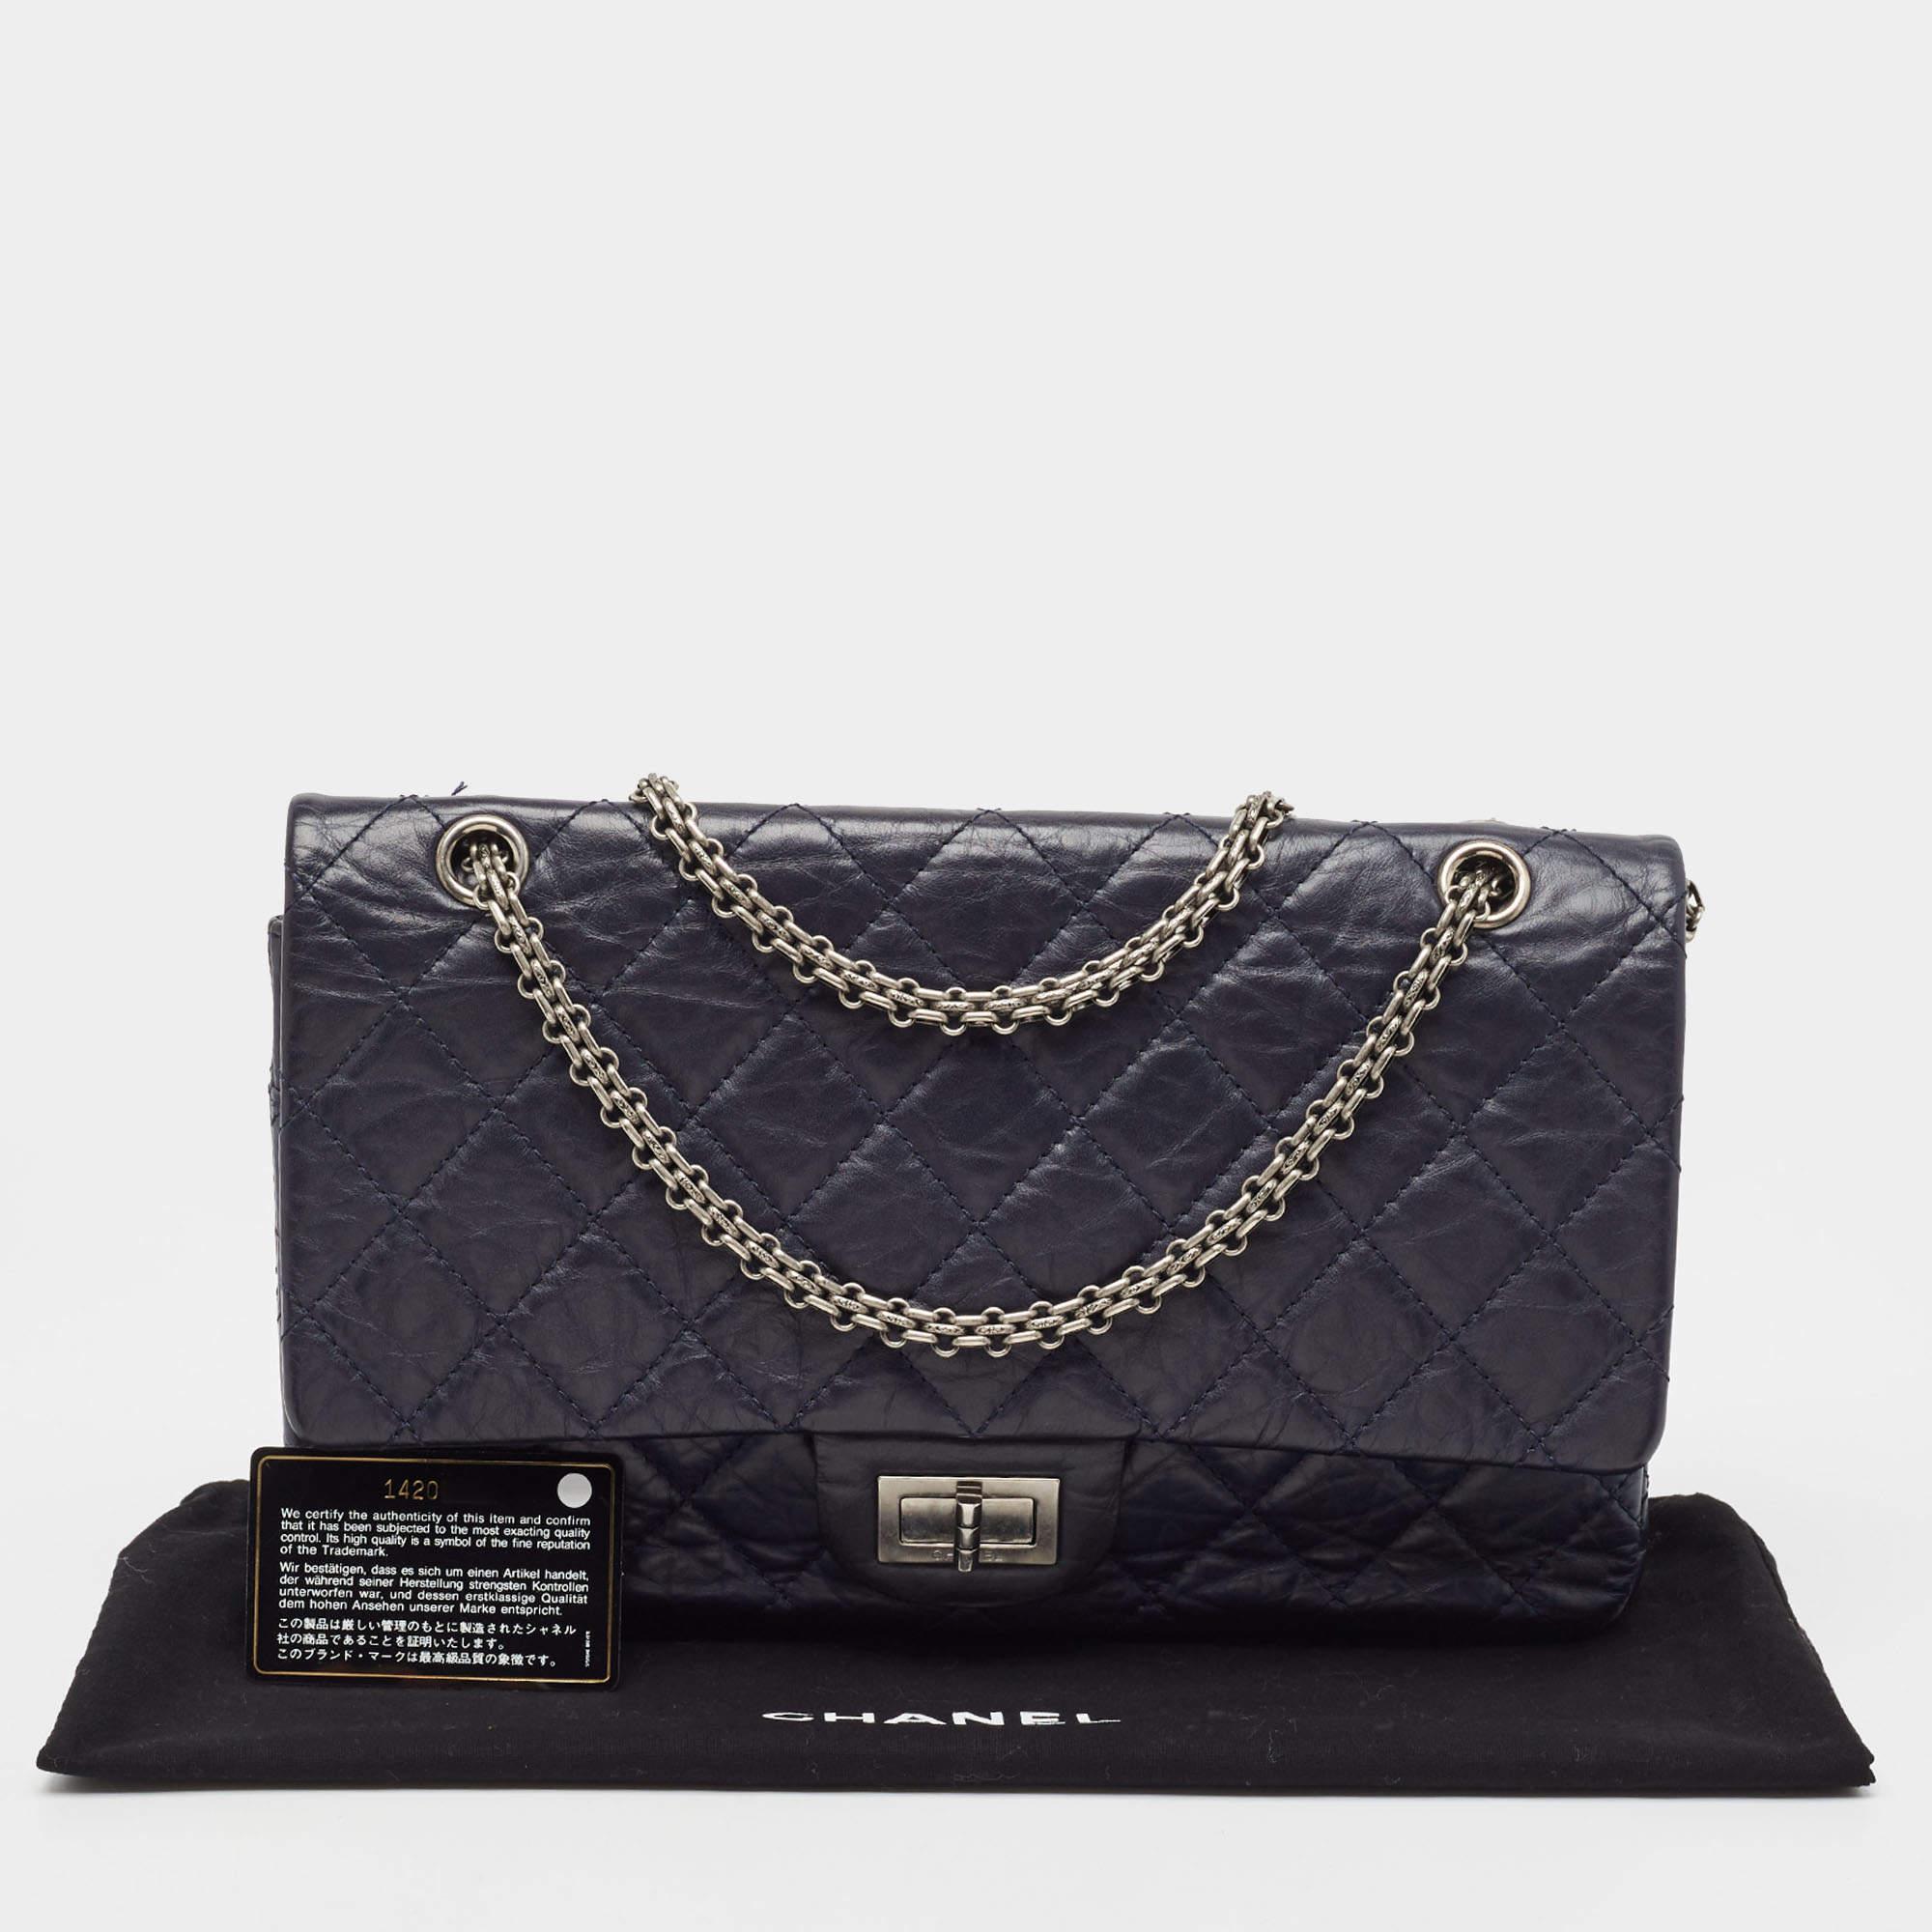 Chanel Navy Blue Quilted Aged Leather 227 Reissue 2.55 Flap Bag For Sale 11